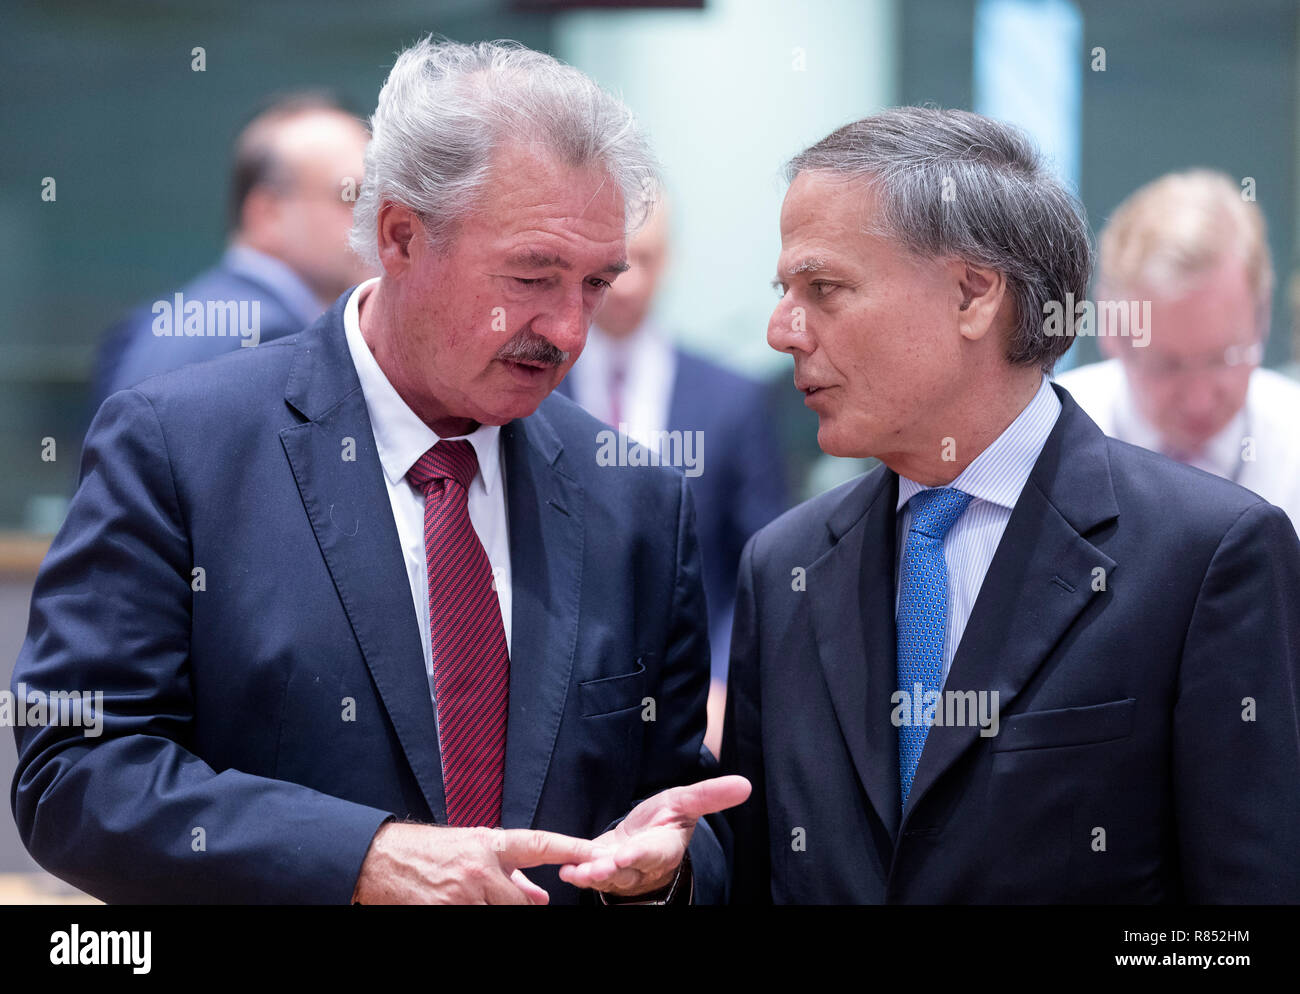 Belgium, Brussels, on 2018/09/18: Enzo Moavero Milanesi, Italian Minister of Foreign Affairs and Jean Asselborn,  Luxembourgish Minister for Foreign A Stock Photo